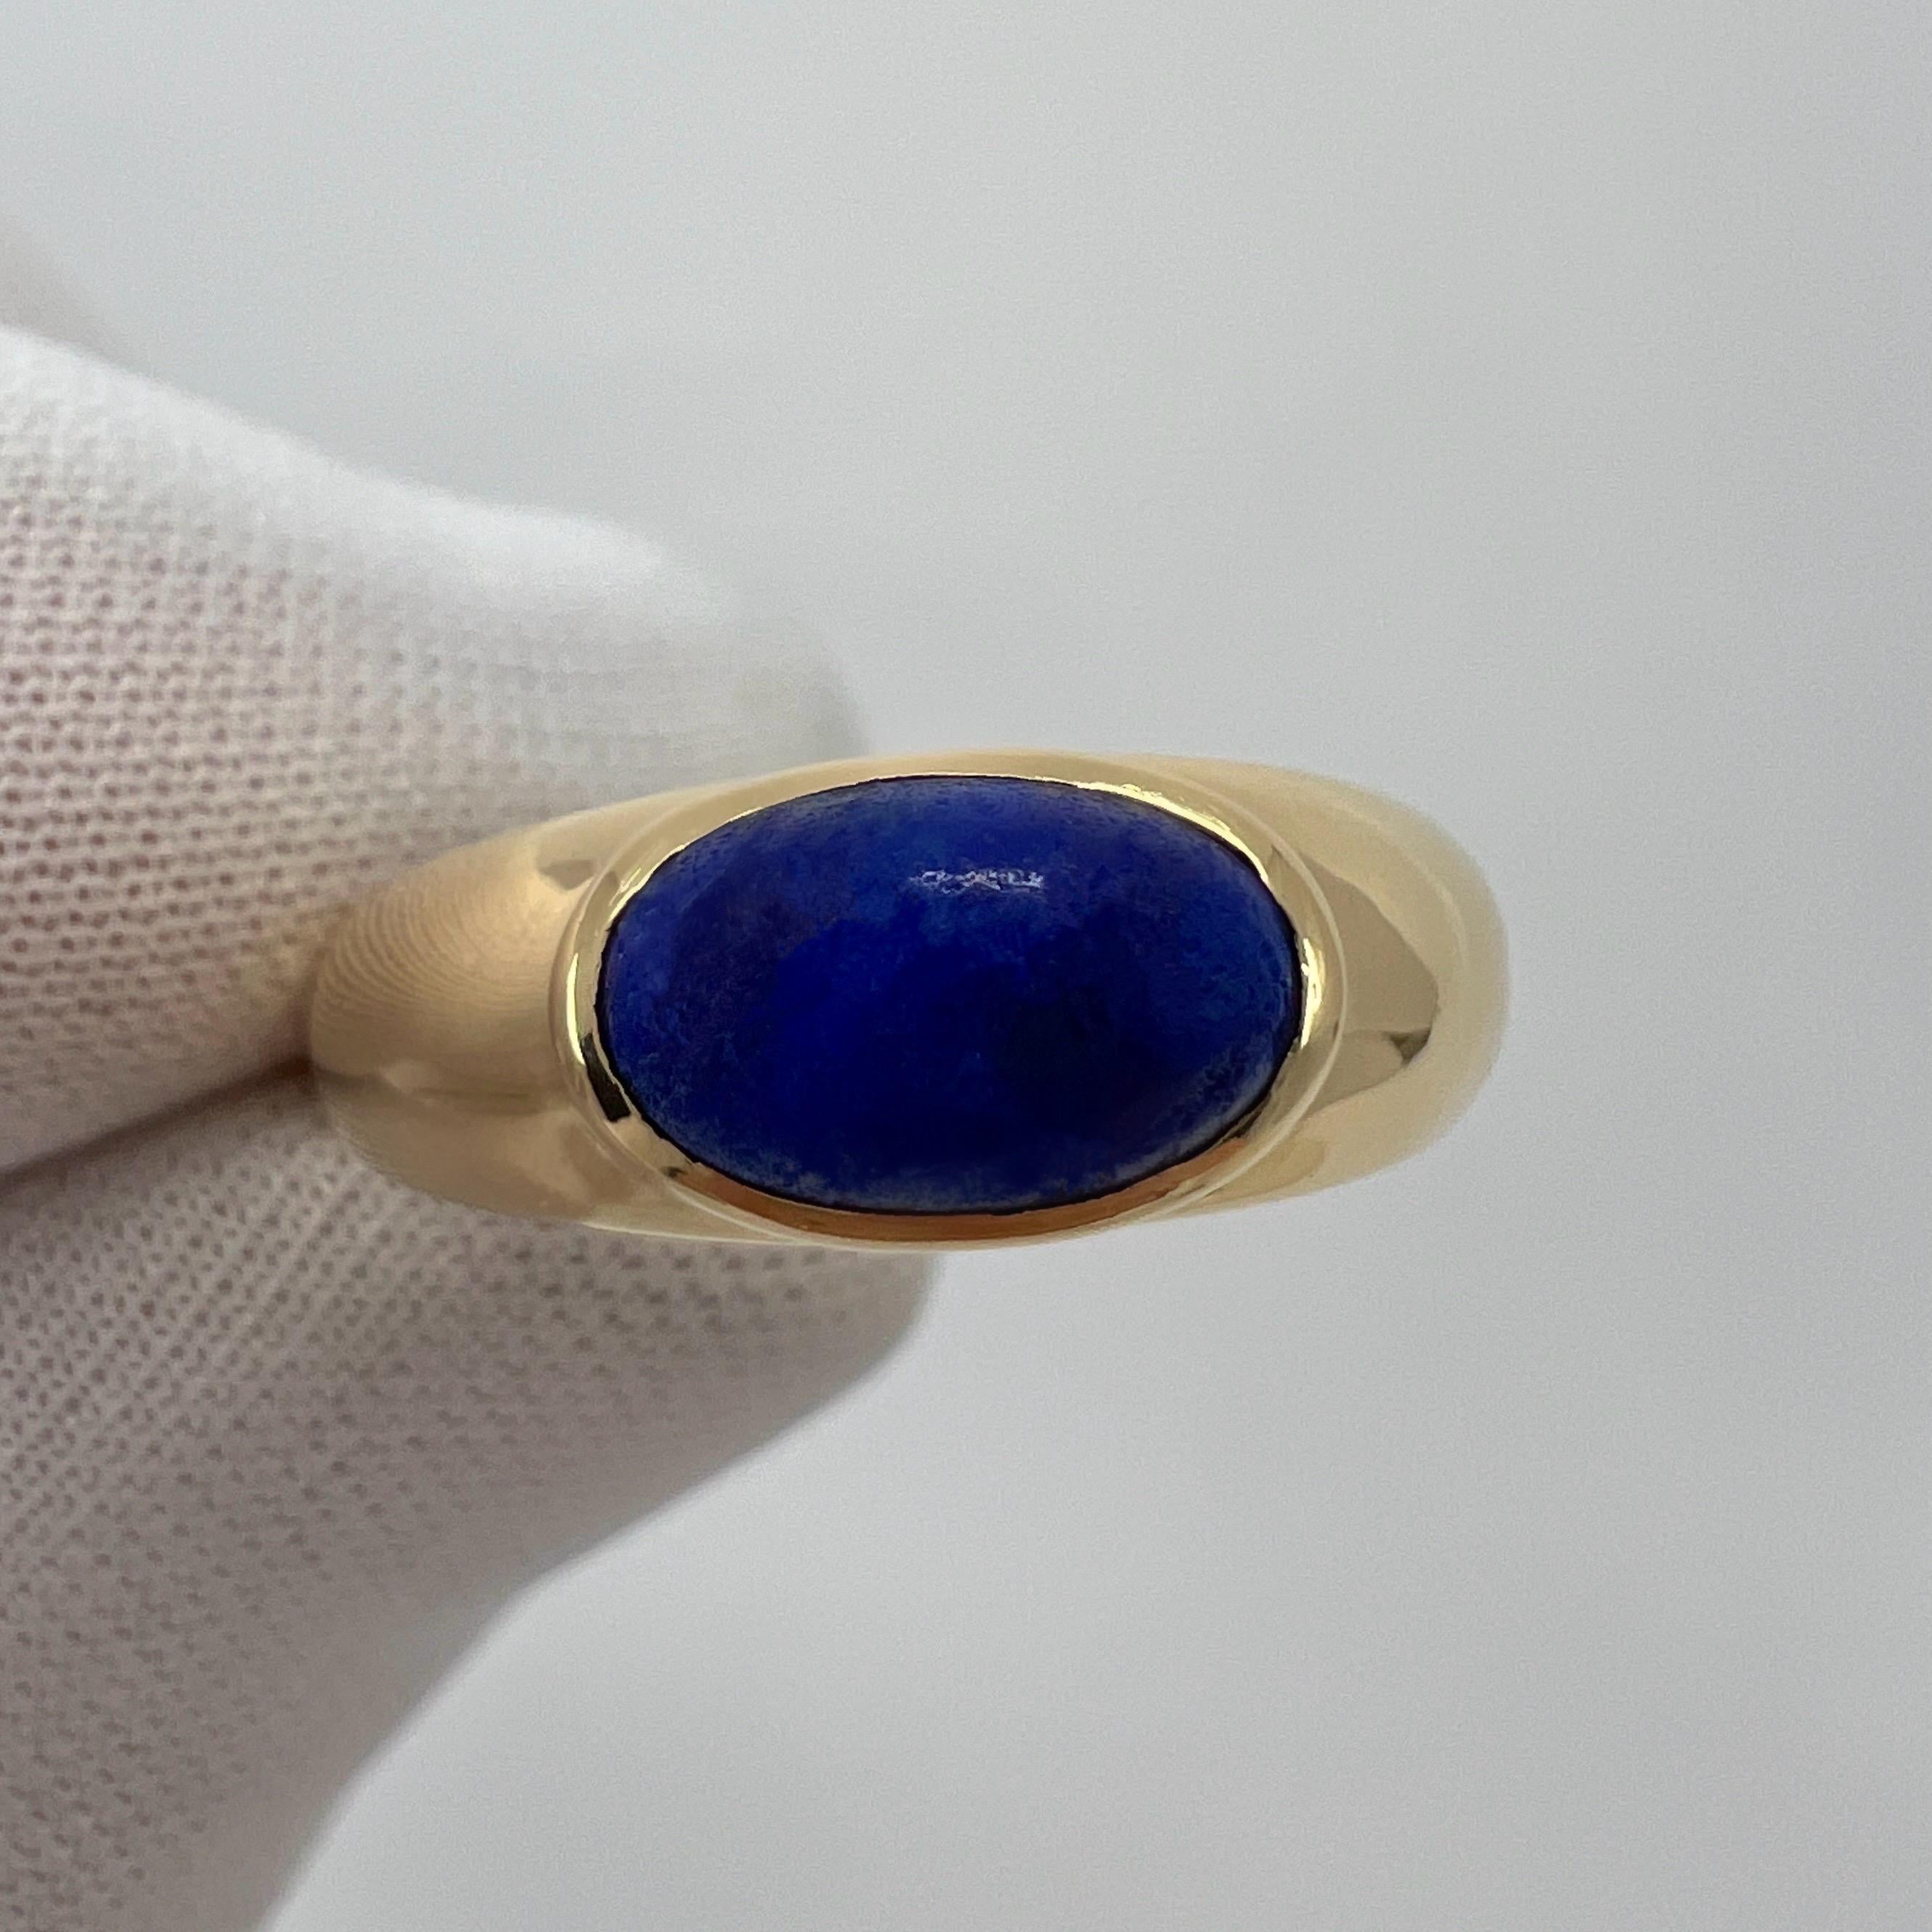 Rare Vintage Van Cleef & Arpels Lapis Lazuli 18k Yellow Gold Signet Style Ring.

A stunning vintage (almost antique) ring by French fine jewellery house Van Cleef & Arpels. 
Very rare vintage VCA ring set with a deep blue oval cabochon lapis lazuli